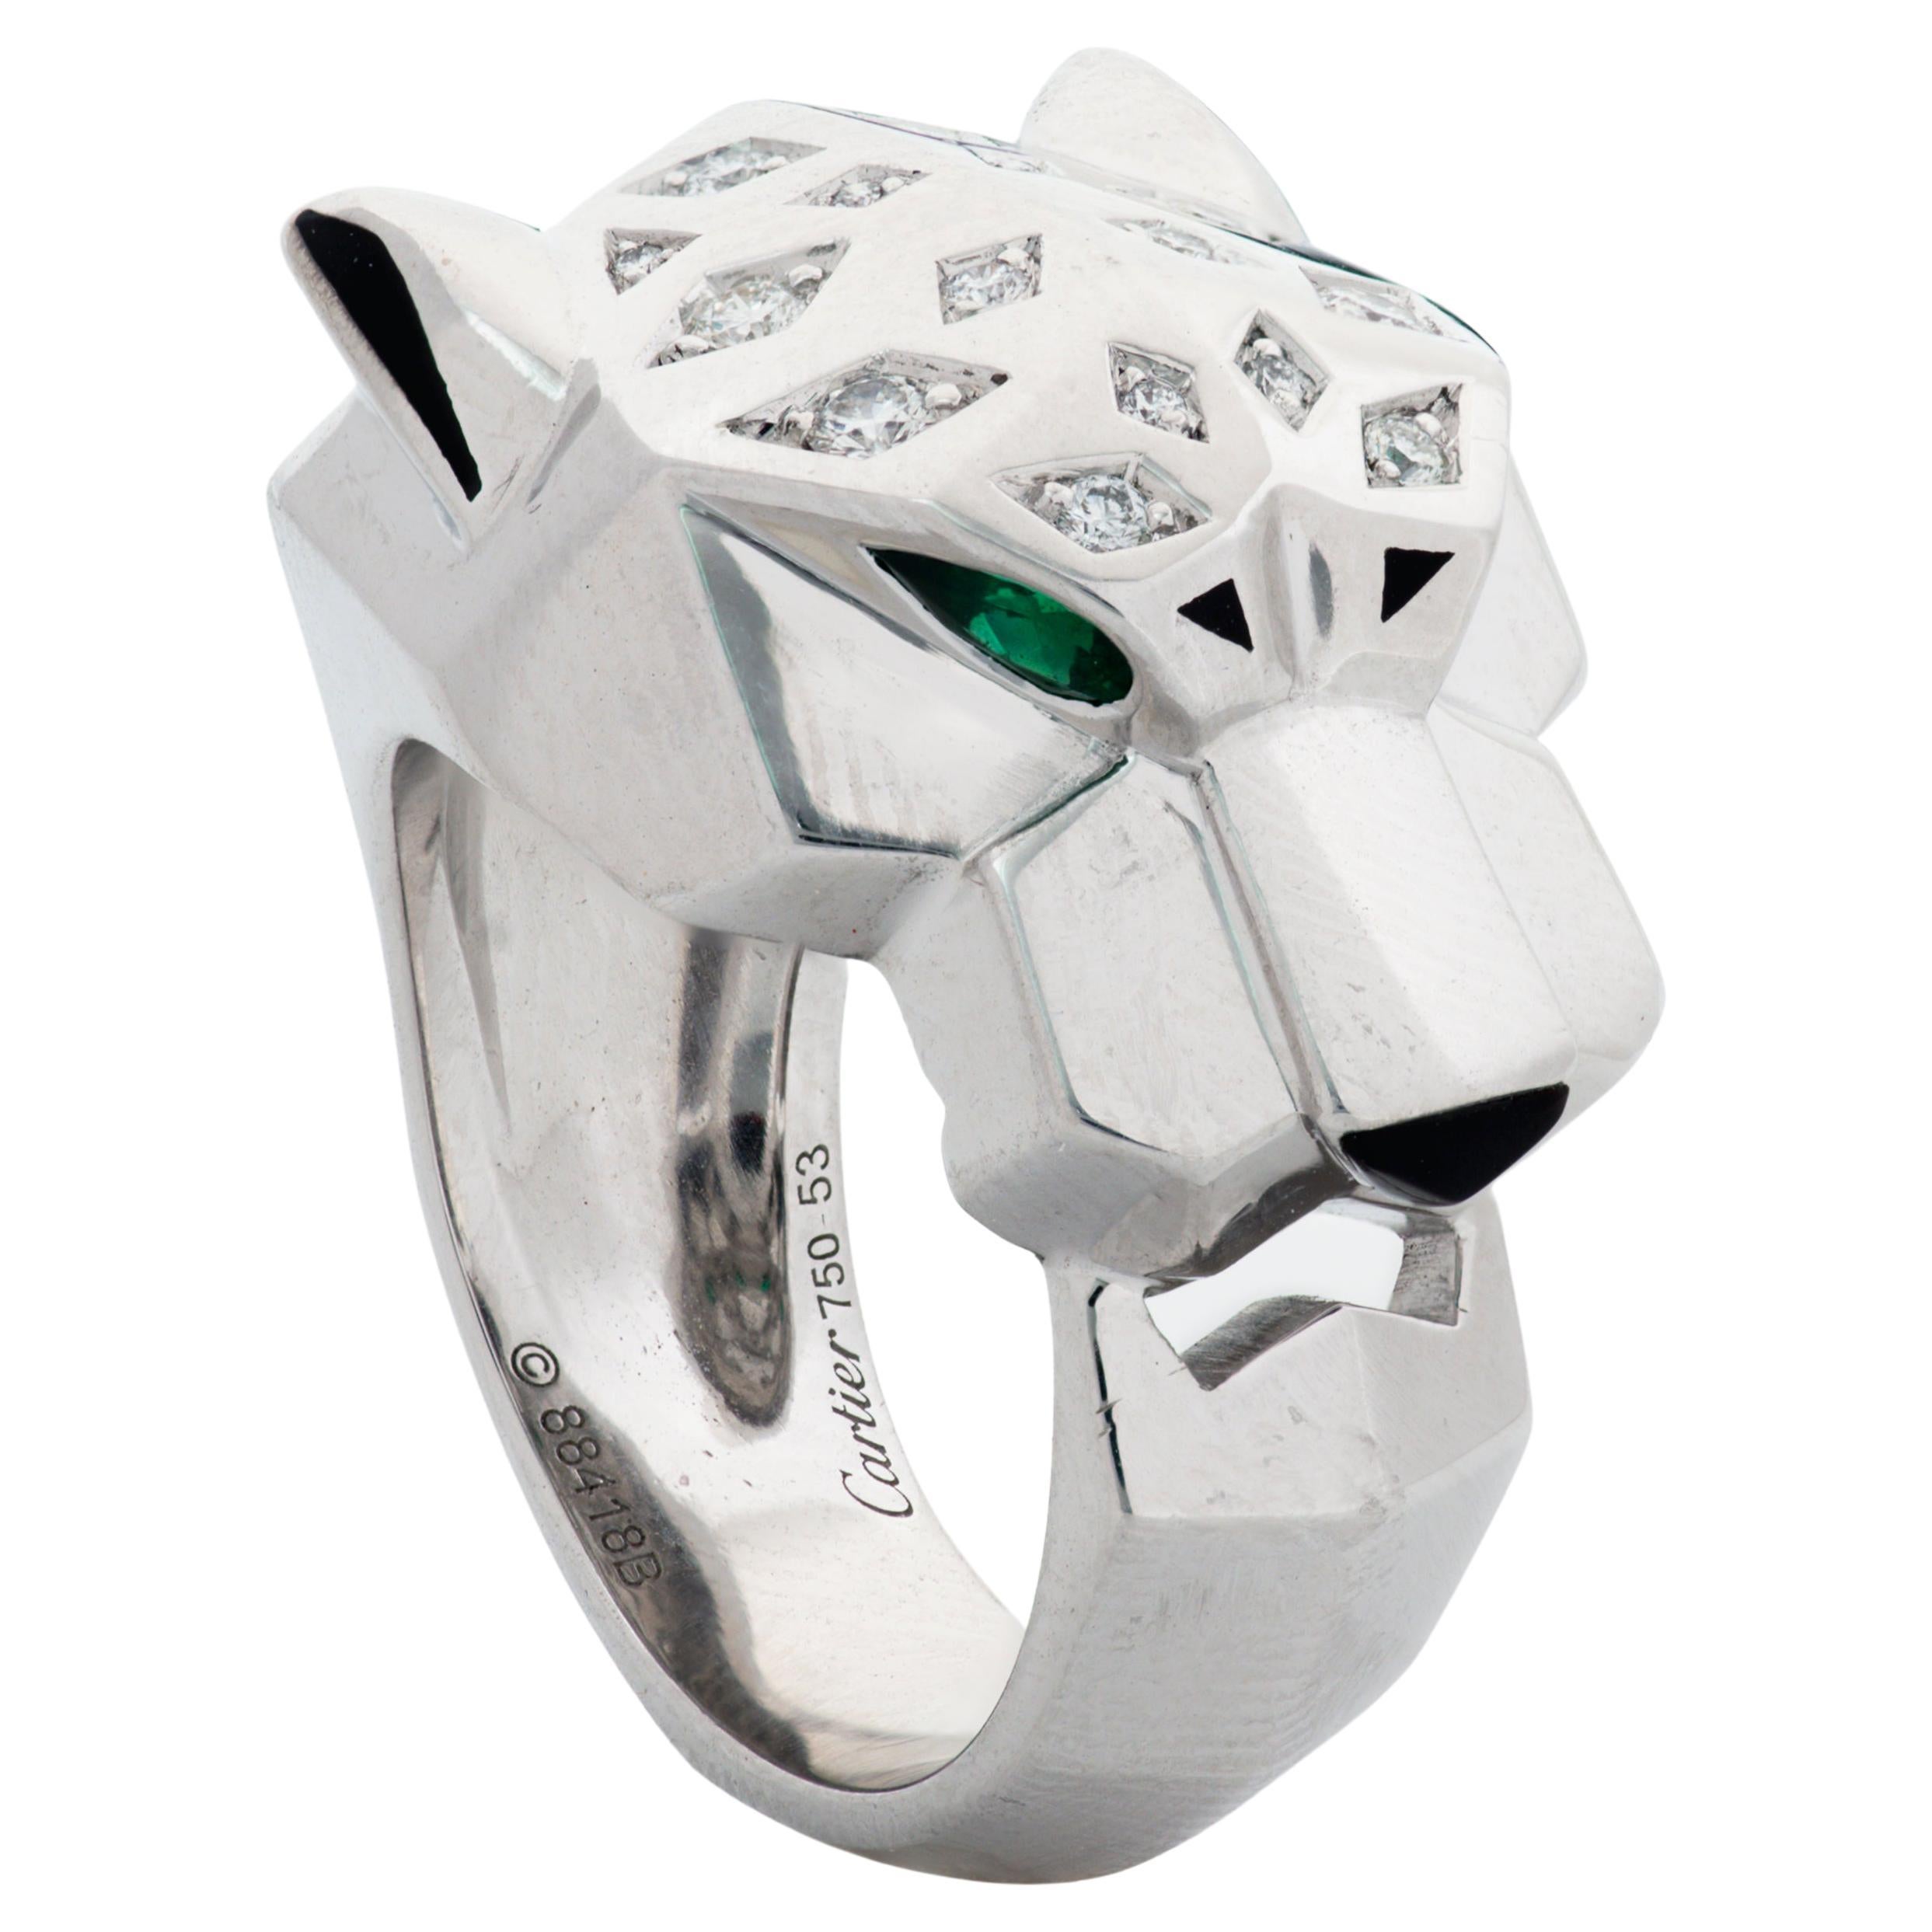 Panthere De Cartier Diamond, Emerald and Onyx Ring in 18k White Gold